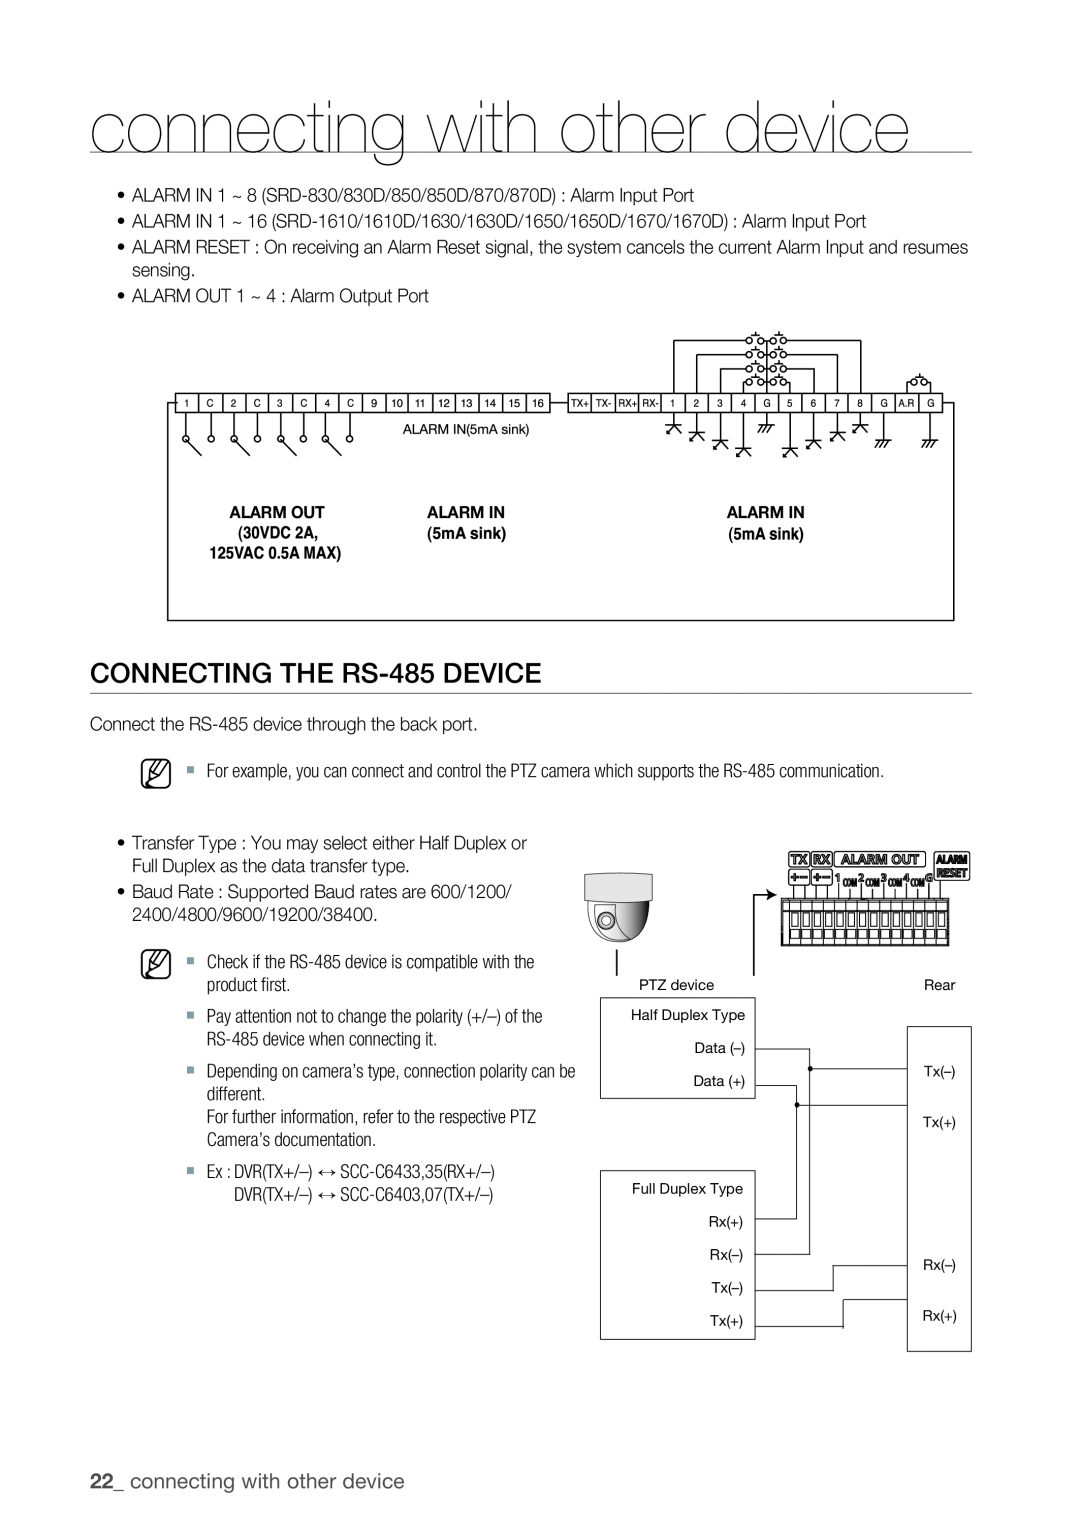 Samsung SRD-1630D, 870D, 1670D, 1650D, SRD-850D, SRD-830D M `, Connecting the RS-485 Device, connecting with other device 